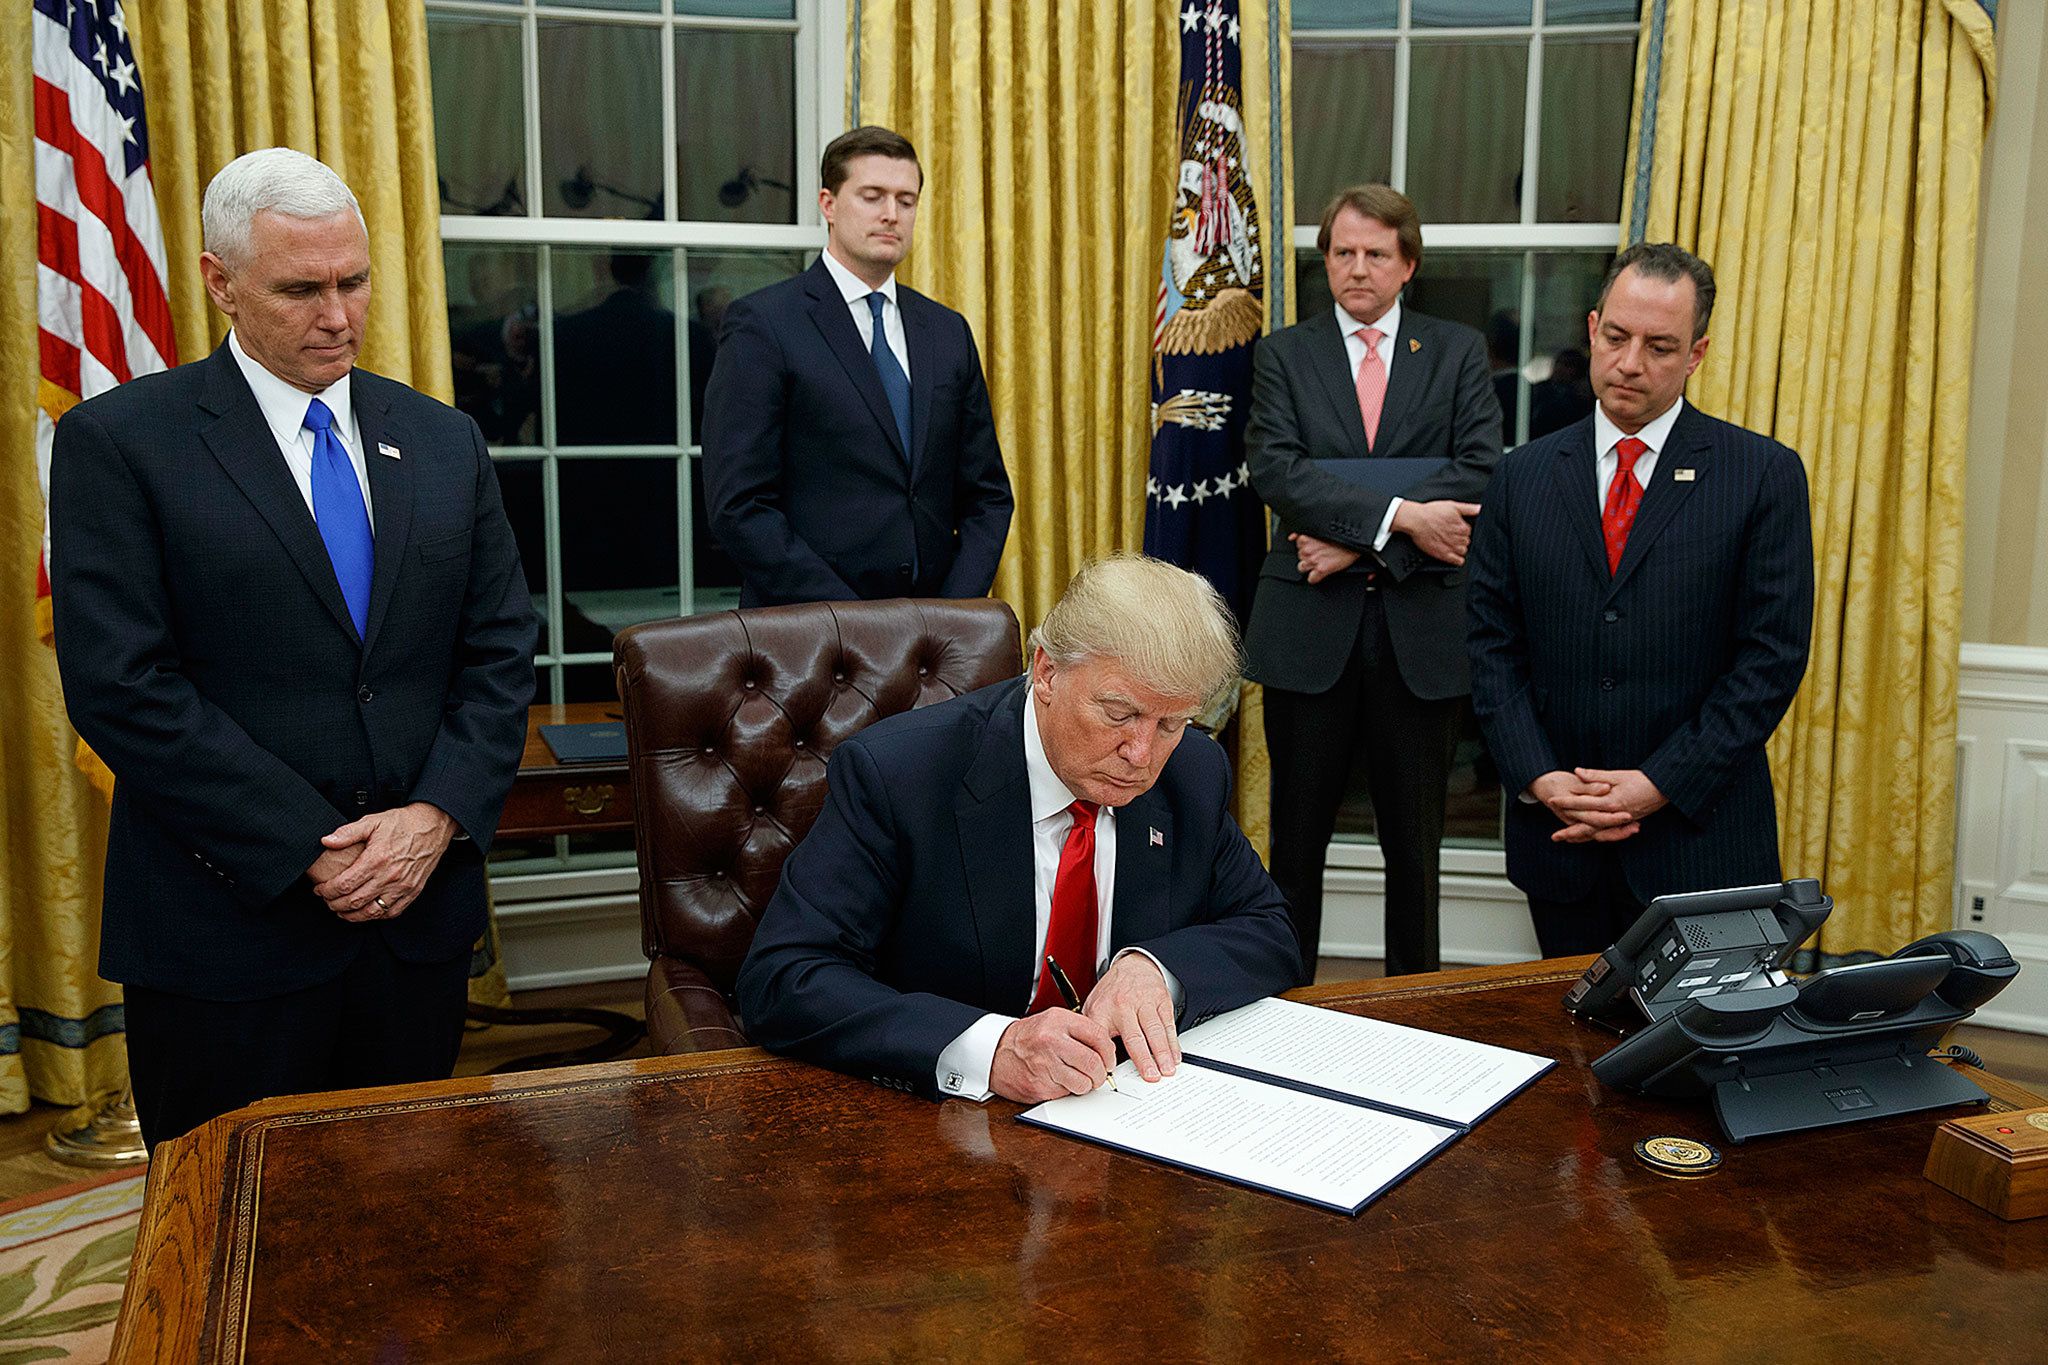 President Donald Trump, flanked by Vice President Mike Pence and Chief of Staff Reince Priebus, signs his first executive order on health care Friday in the Oval Office. (AP Photo/Evan Vucci)